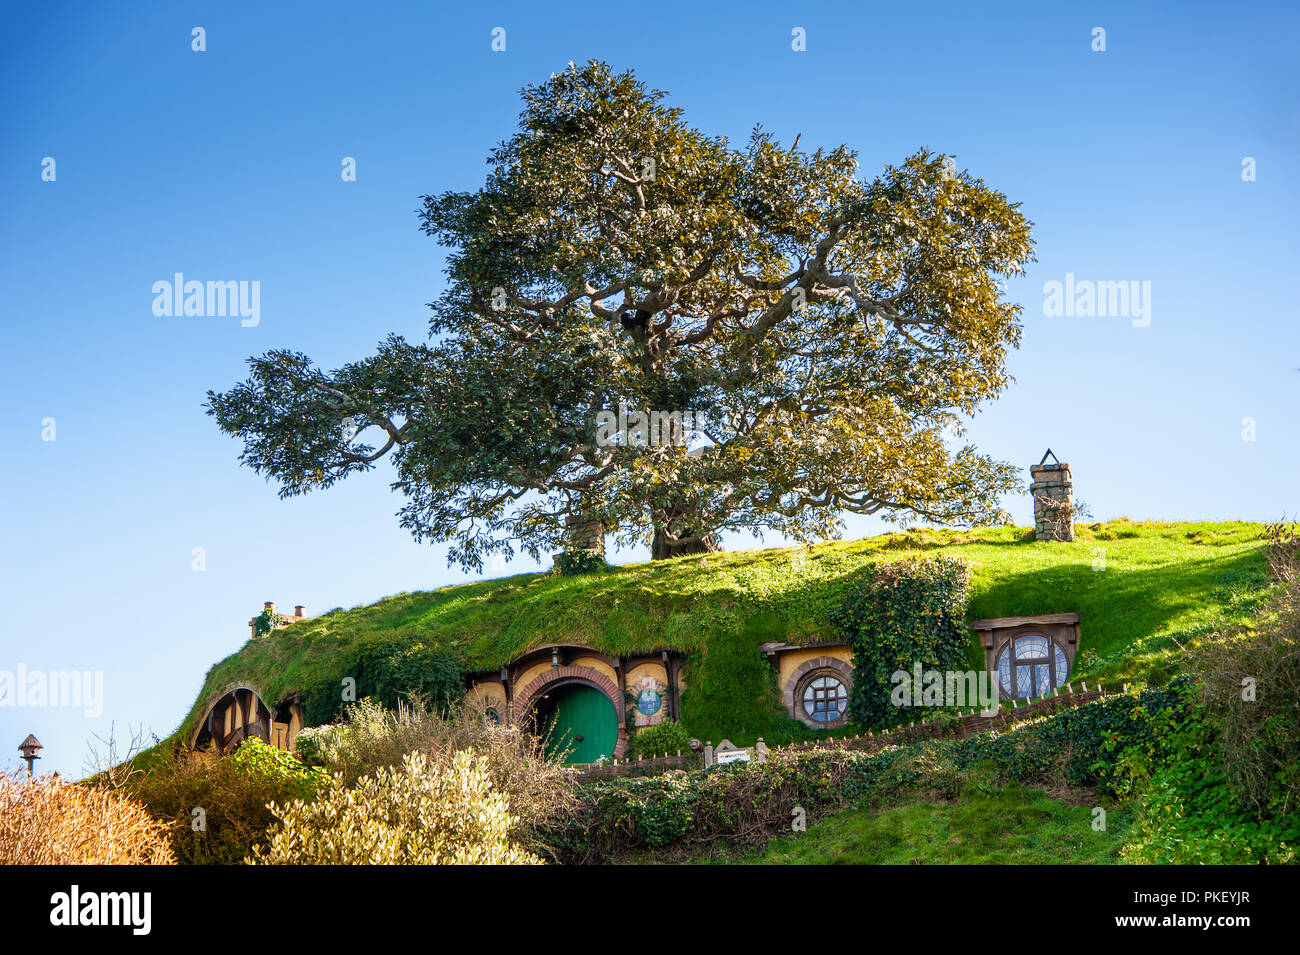 Hobbiton movie set created to film Lord of the Rings and The Hobbit. Stock Photo